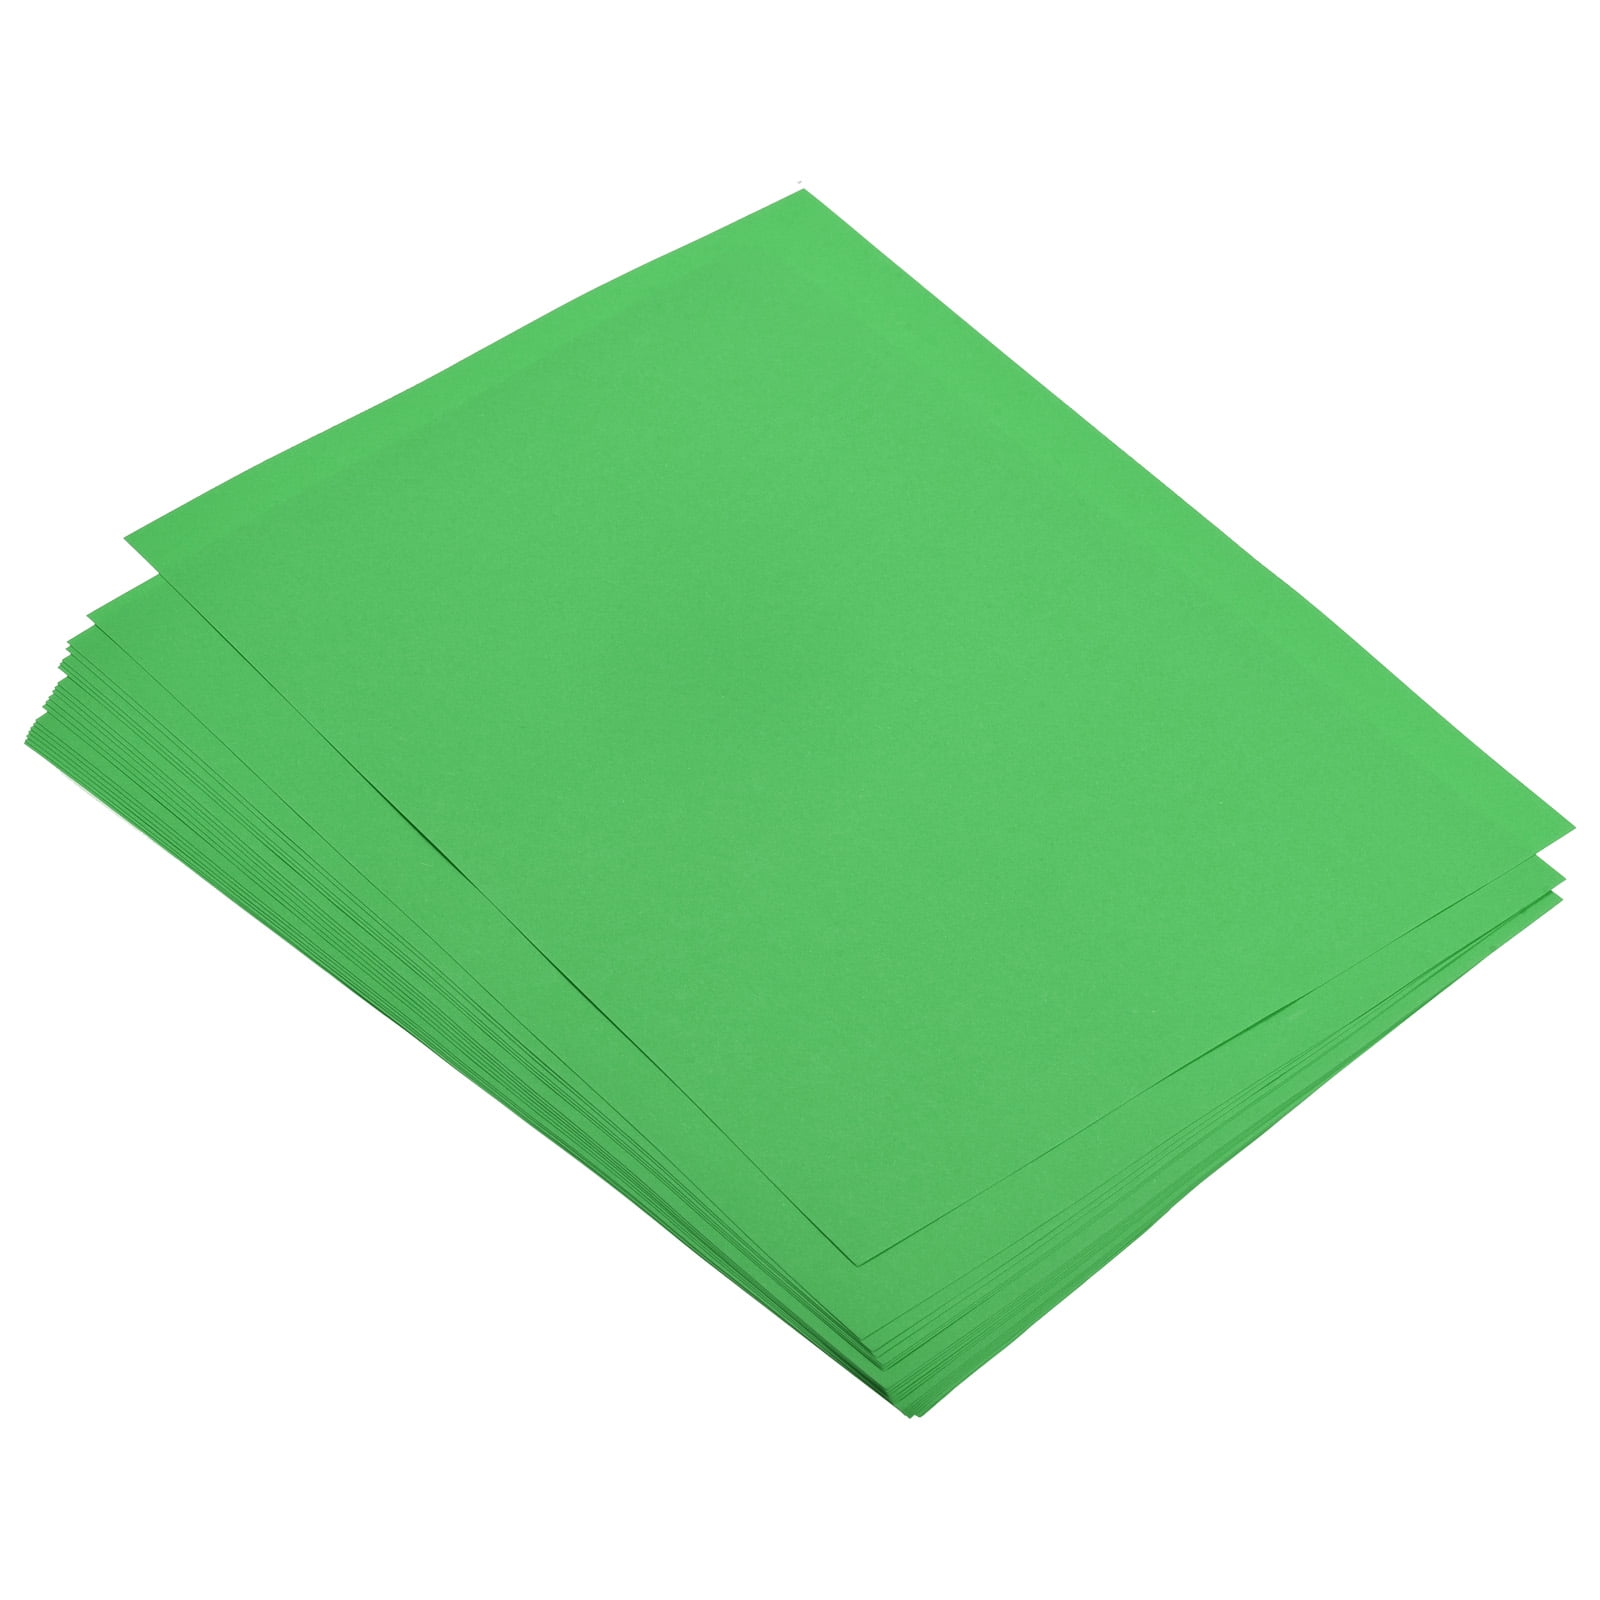 Uxcell Colored Copy Paper 8.5x11 Inch Printer Paper 22lb/80gsm Emerald  Green 25 Sheets for Office Printing